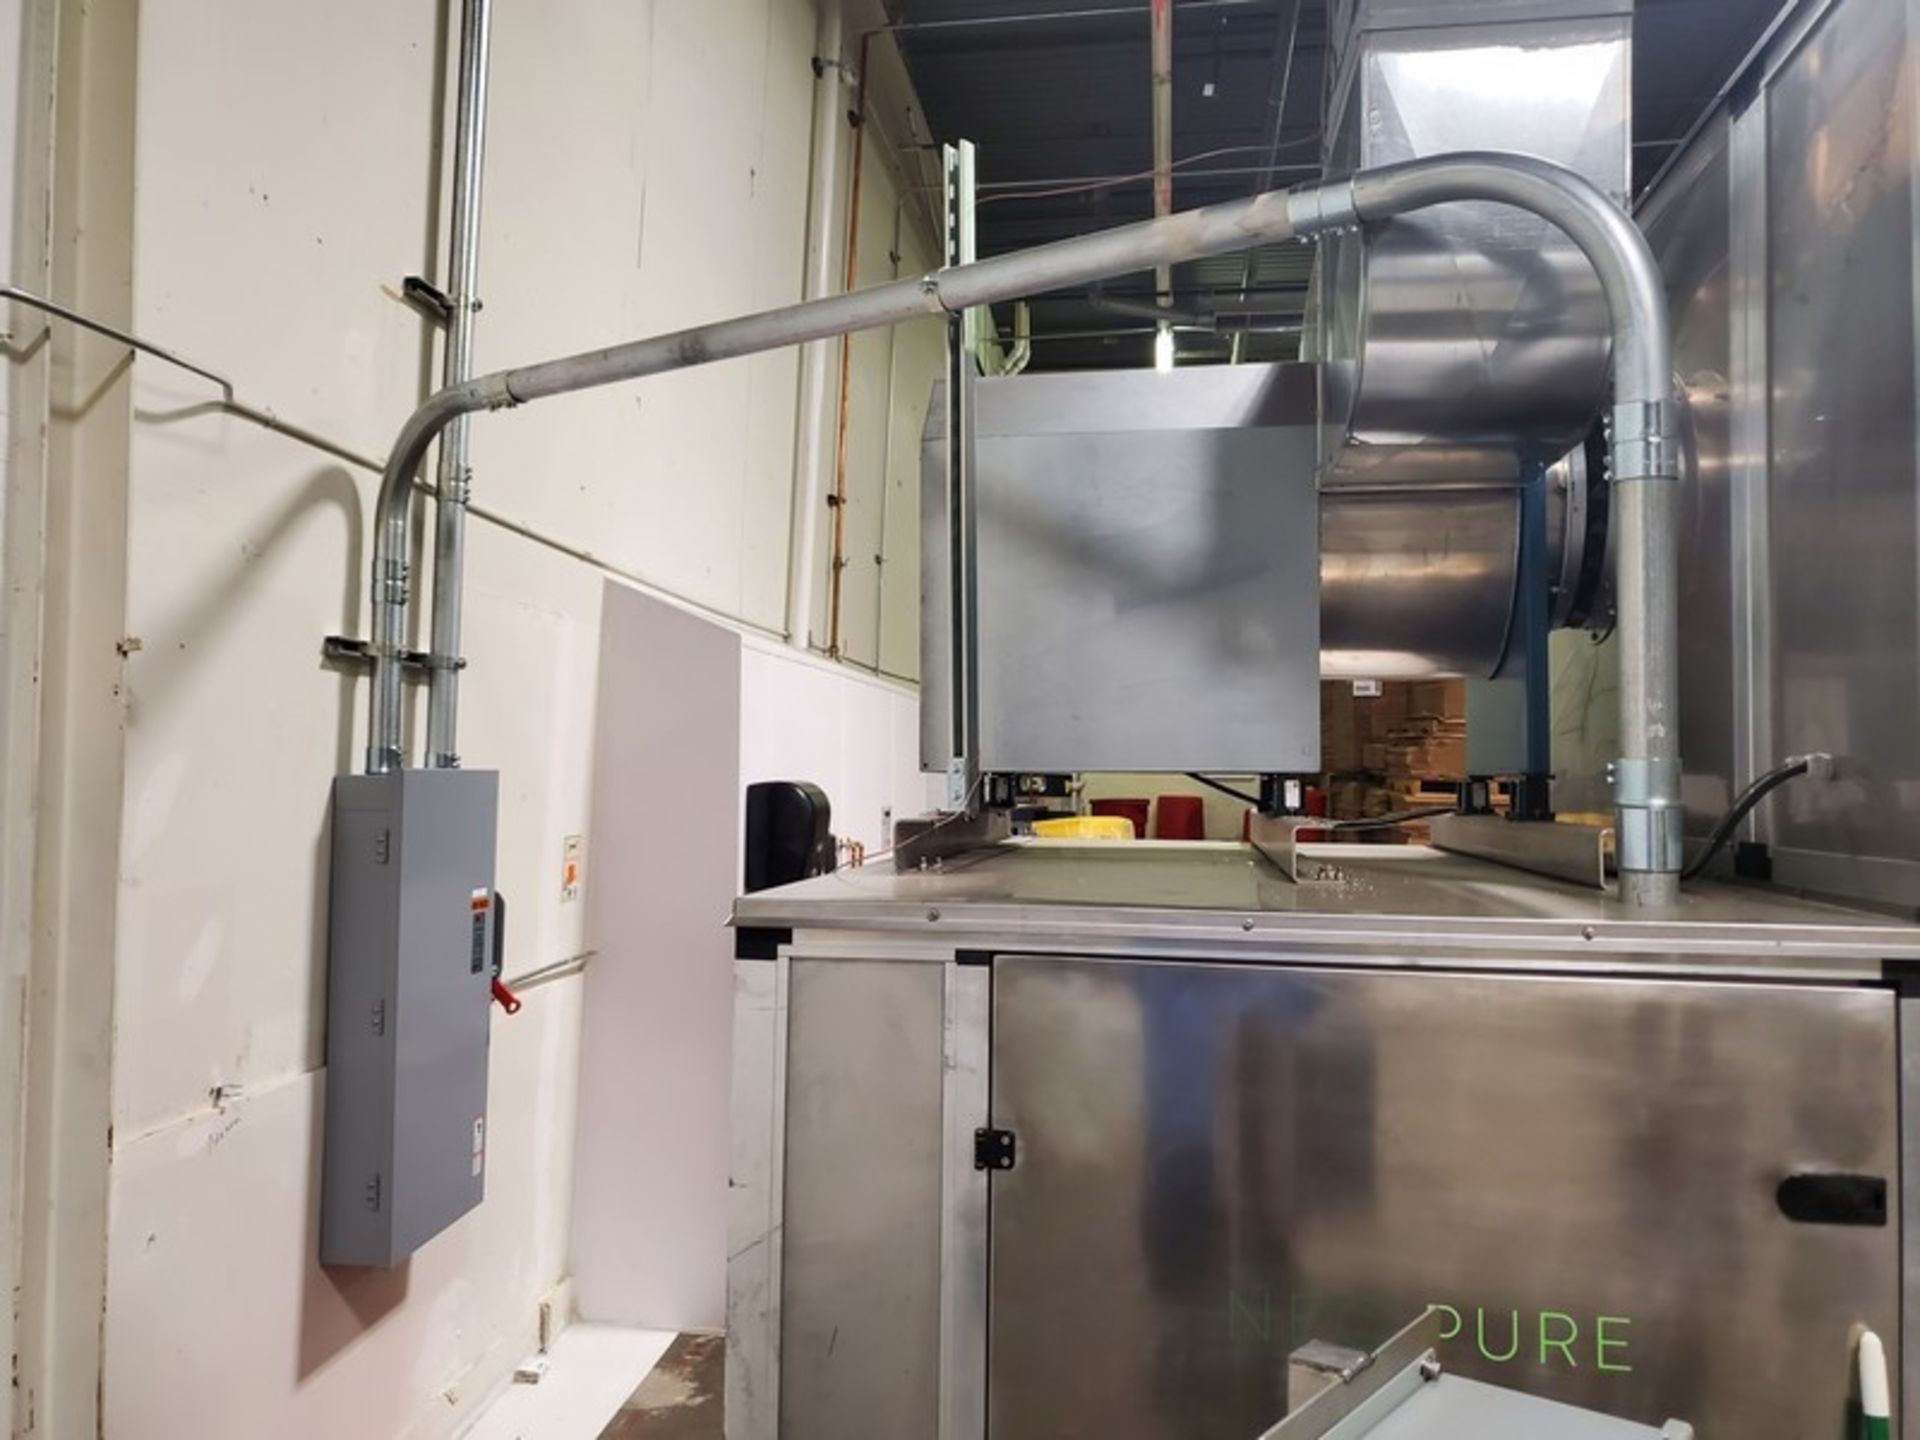 2018 Neo-Pure Seed, Nut, Grain & Hemp Pasteurizing and Drying System, - Image 78 of 108